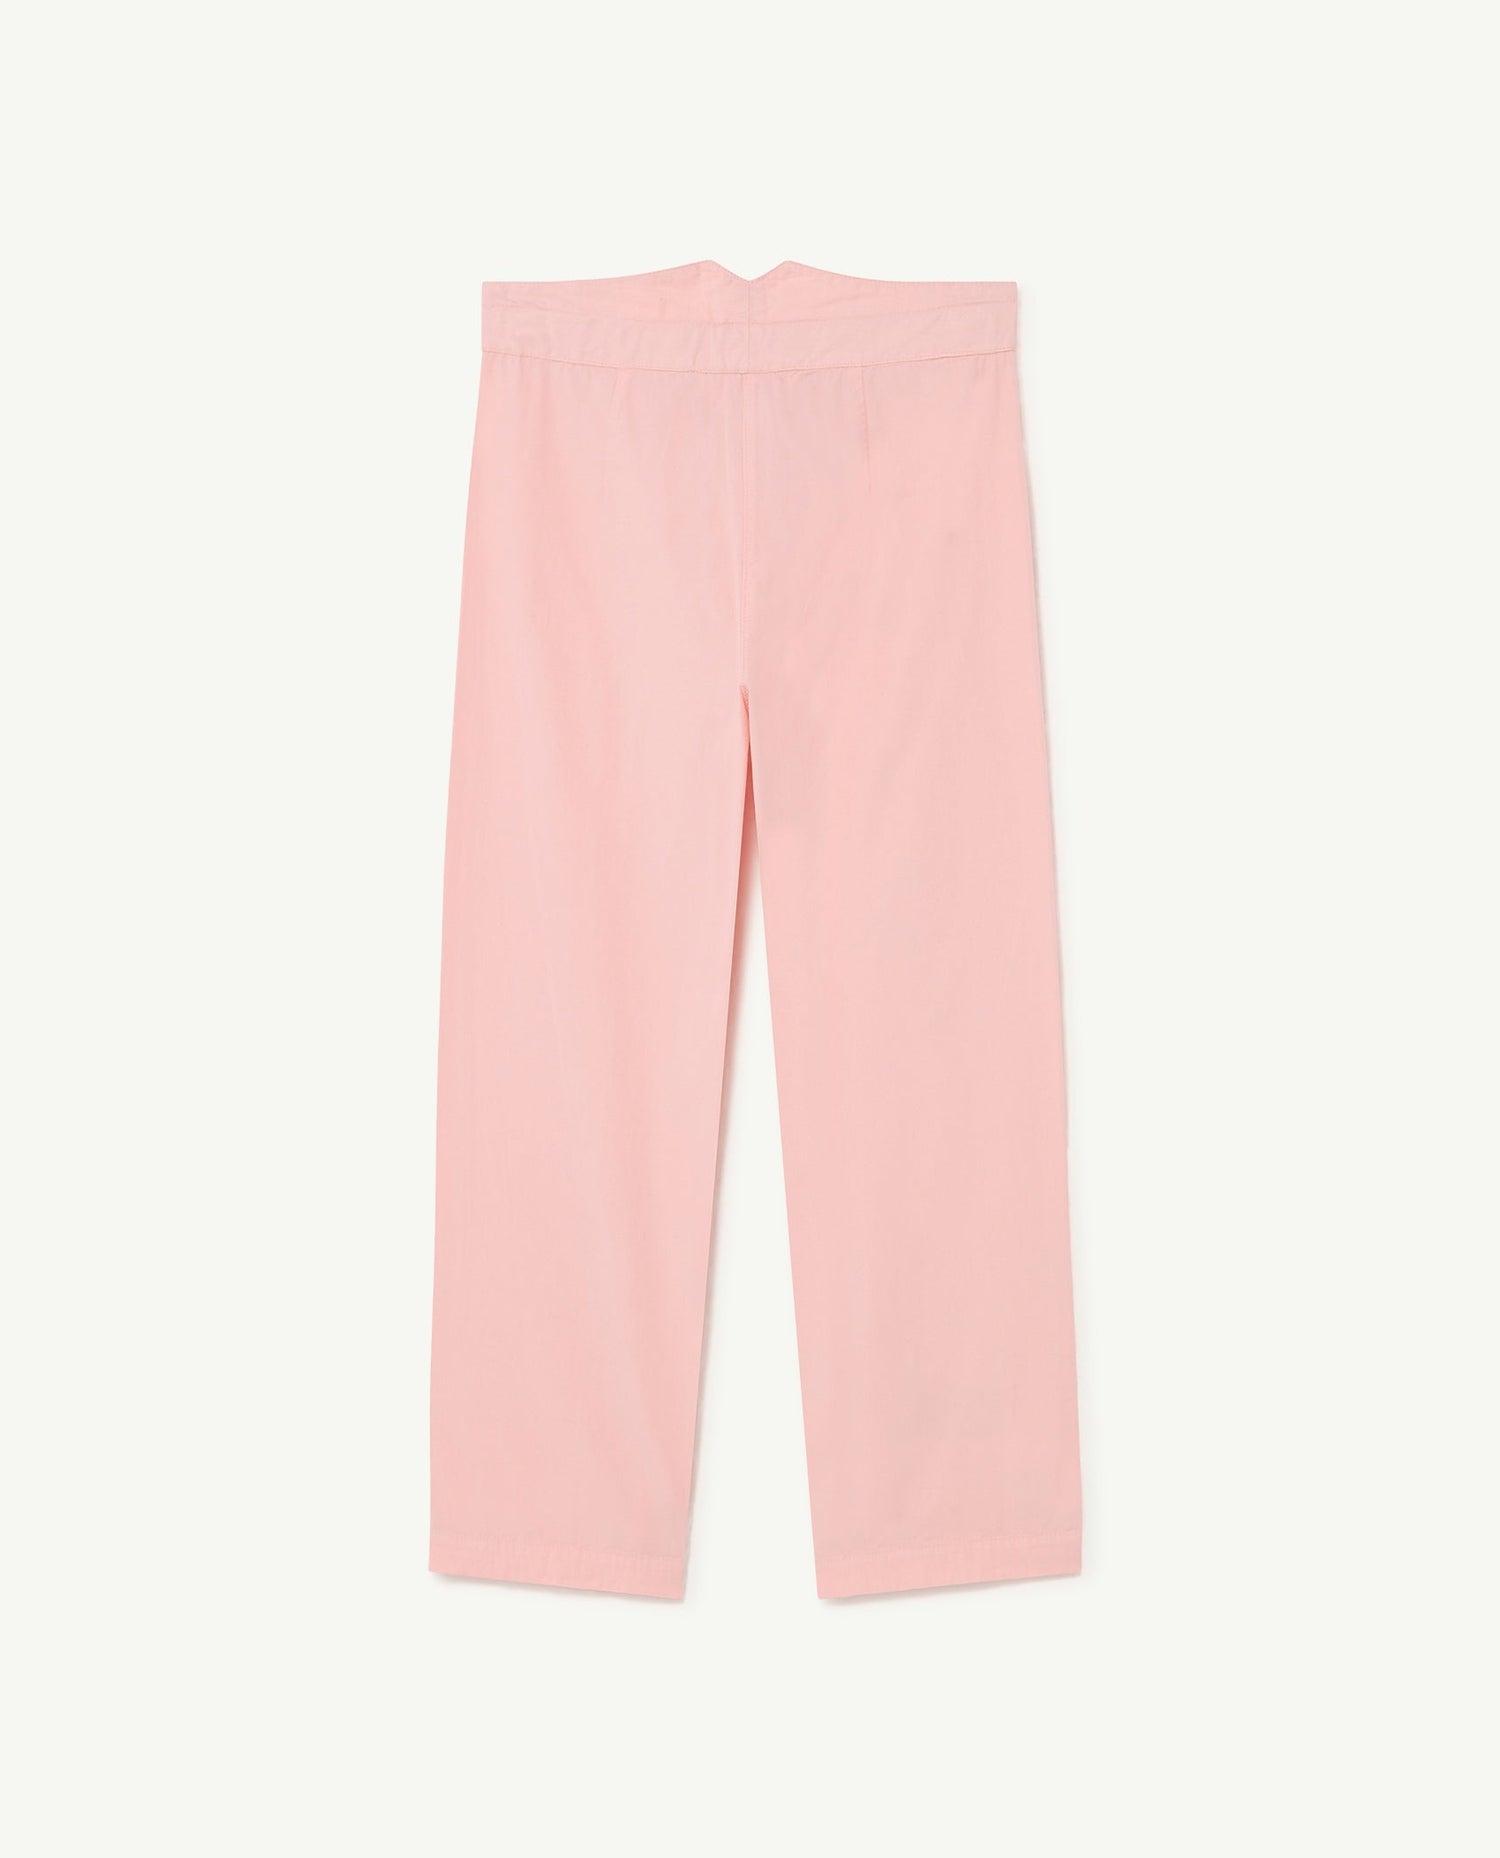 Porcupine pants Pink the animals Trousers The Animals Observatory 